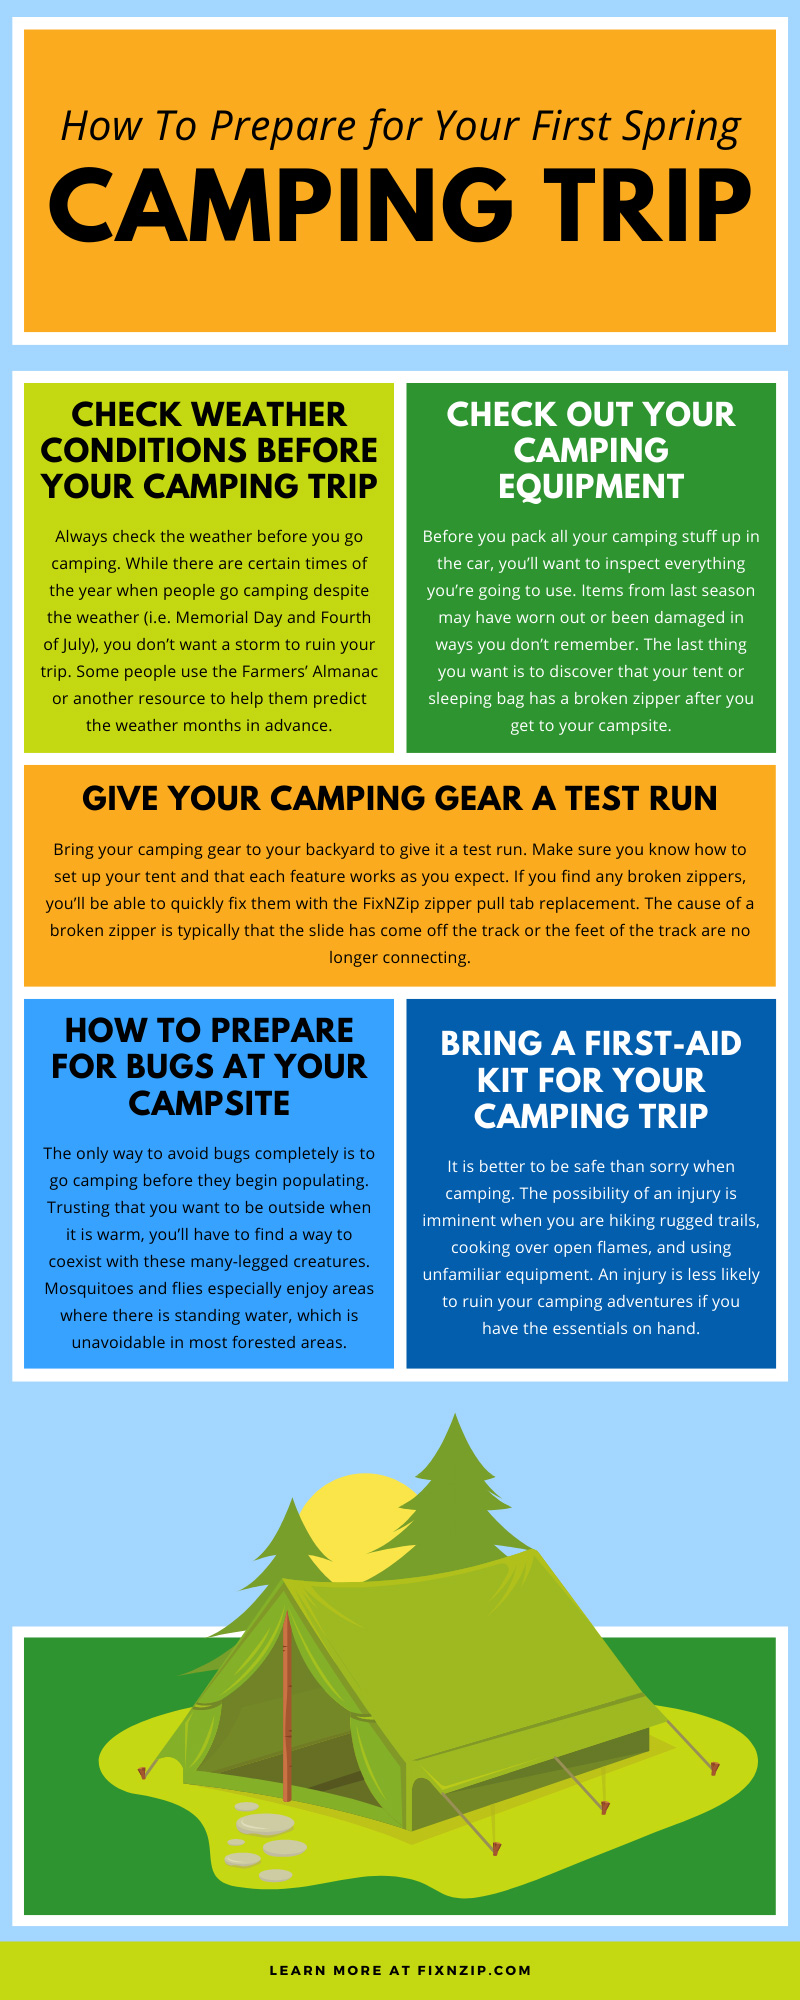 How To Prepare for Your First Spring Camping Trip